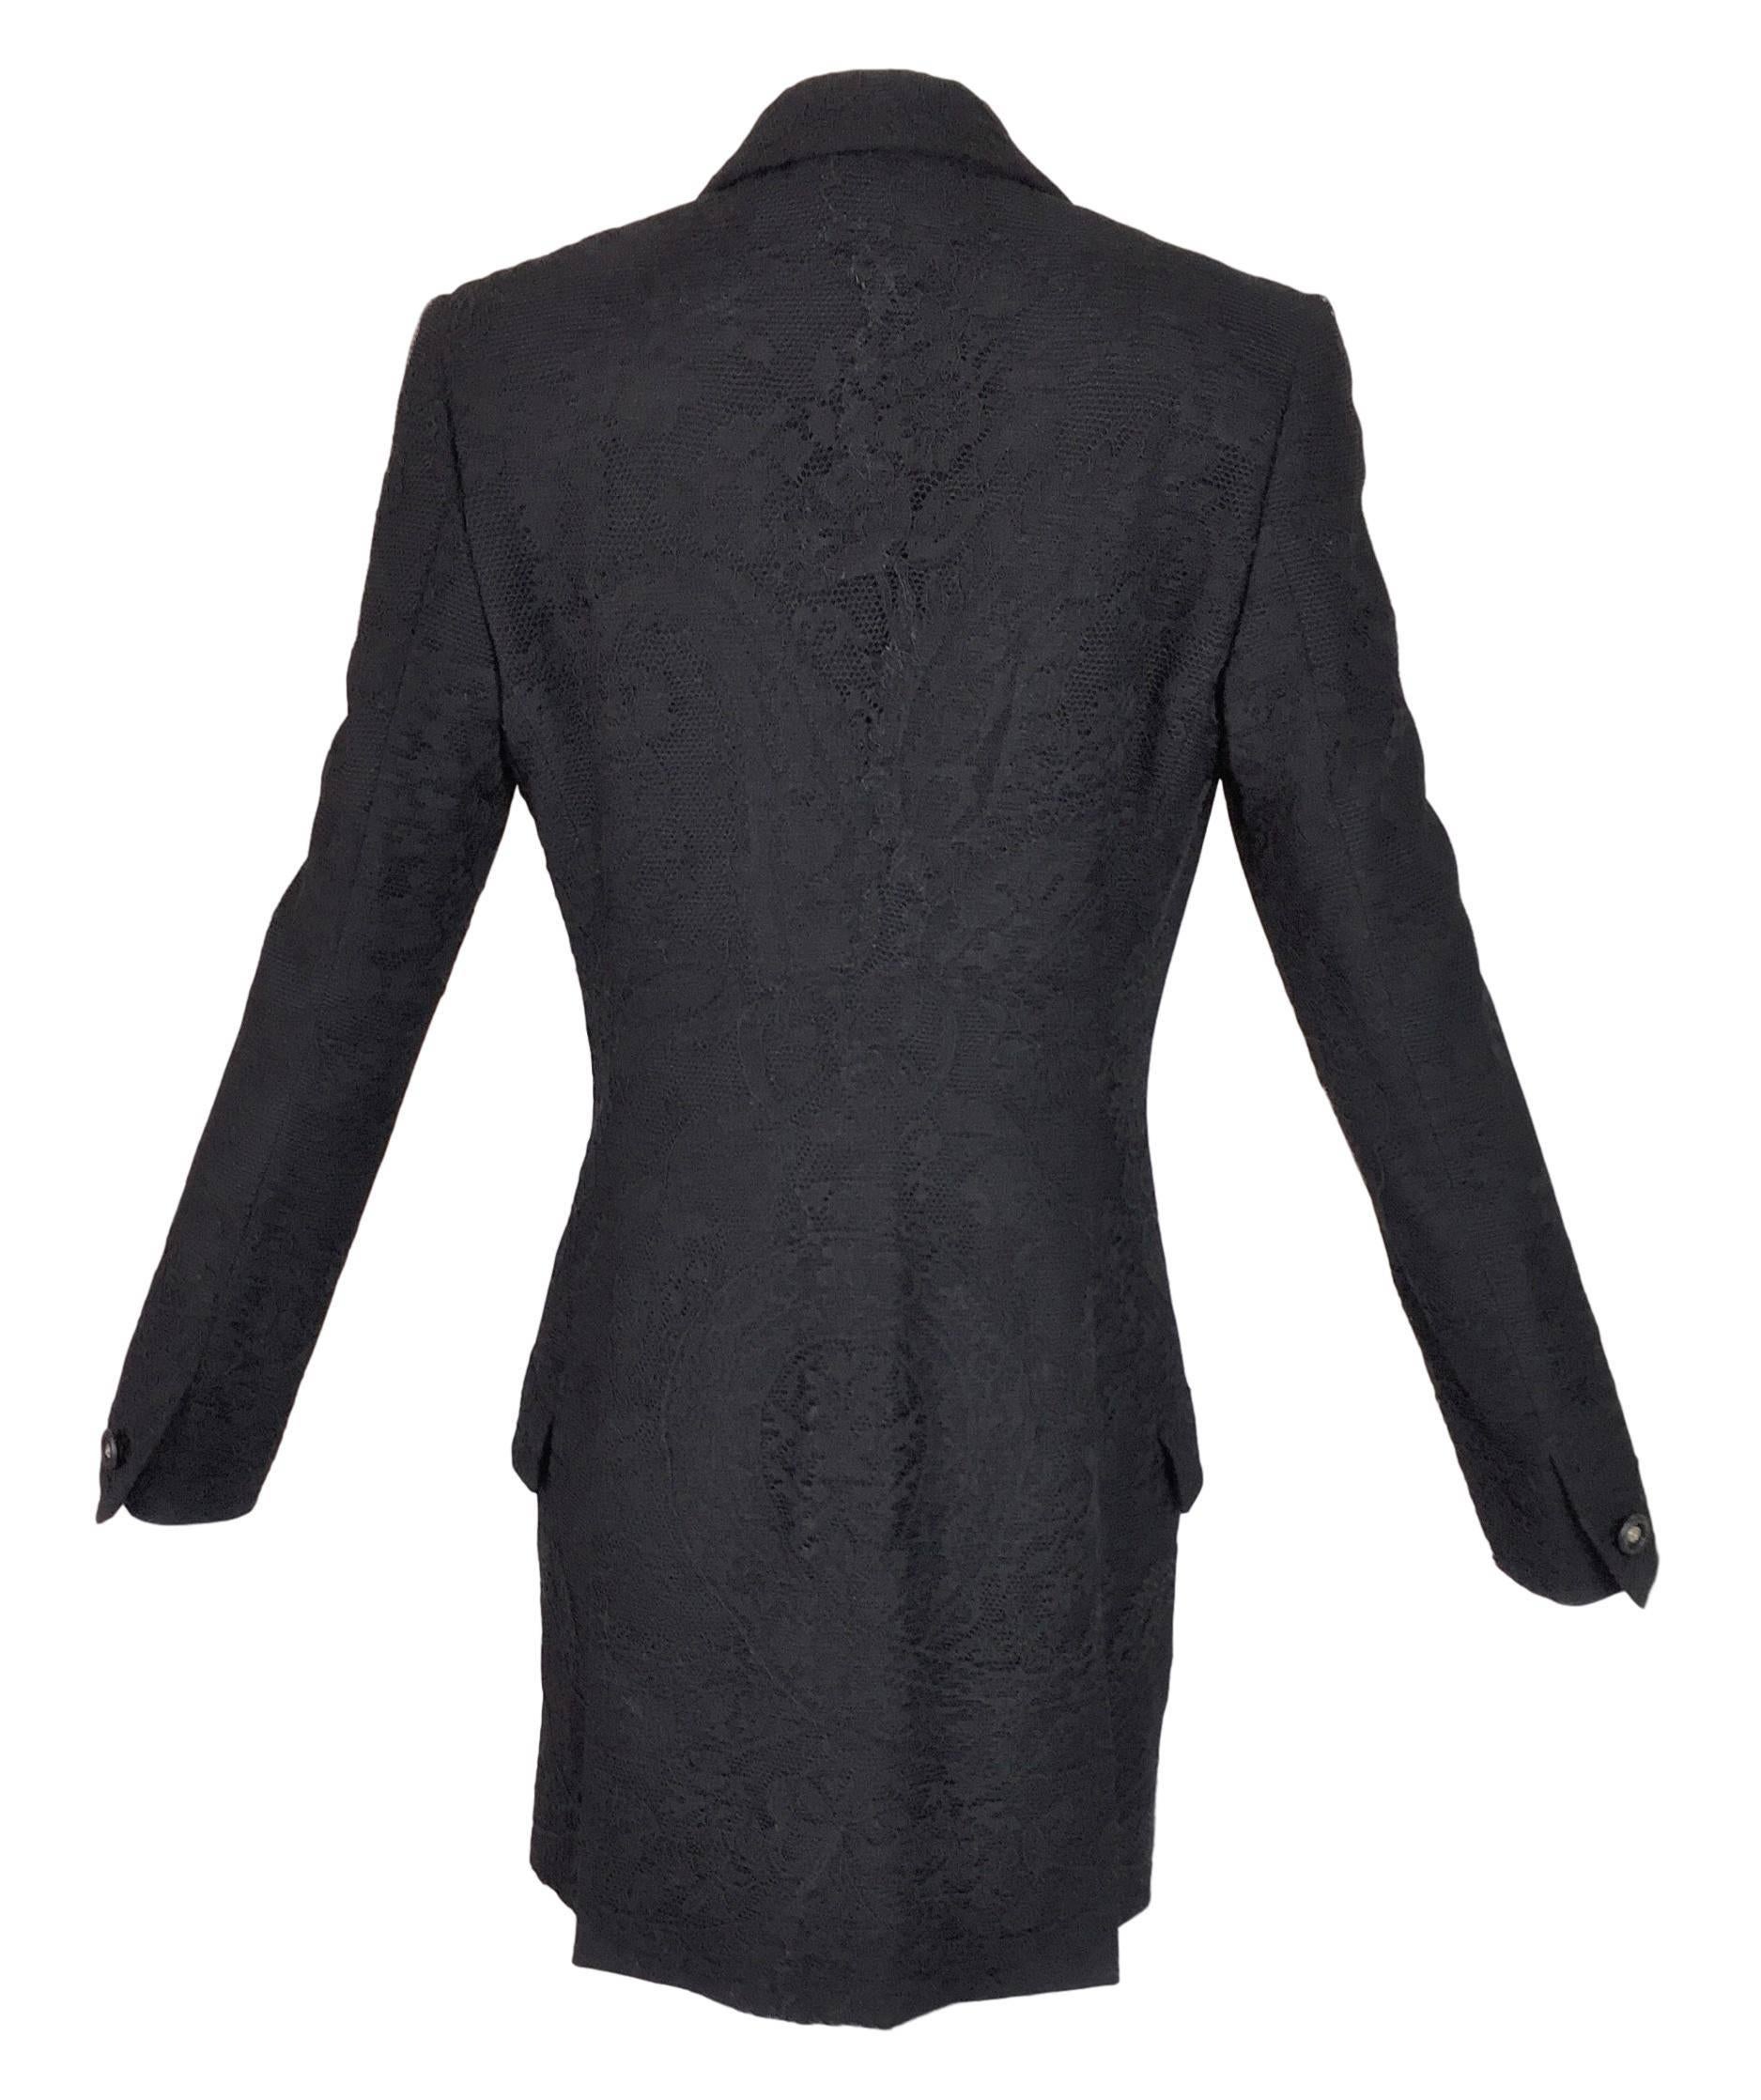 Women's 1996 Gianni Versace Couture Black Mesh & Lace Long Fitted Jacket Coat